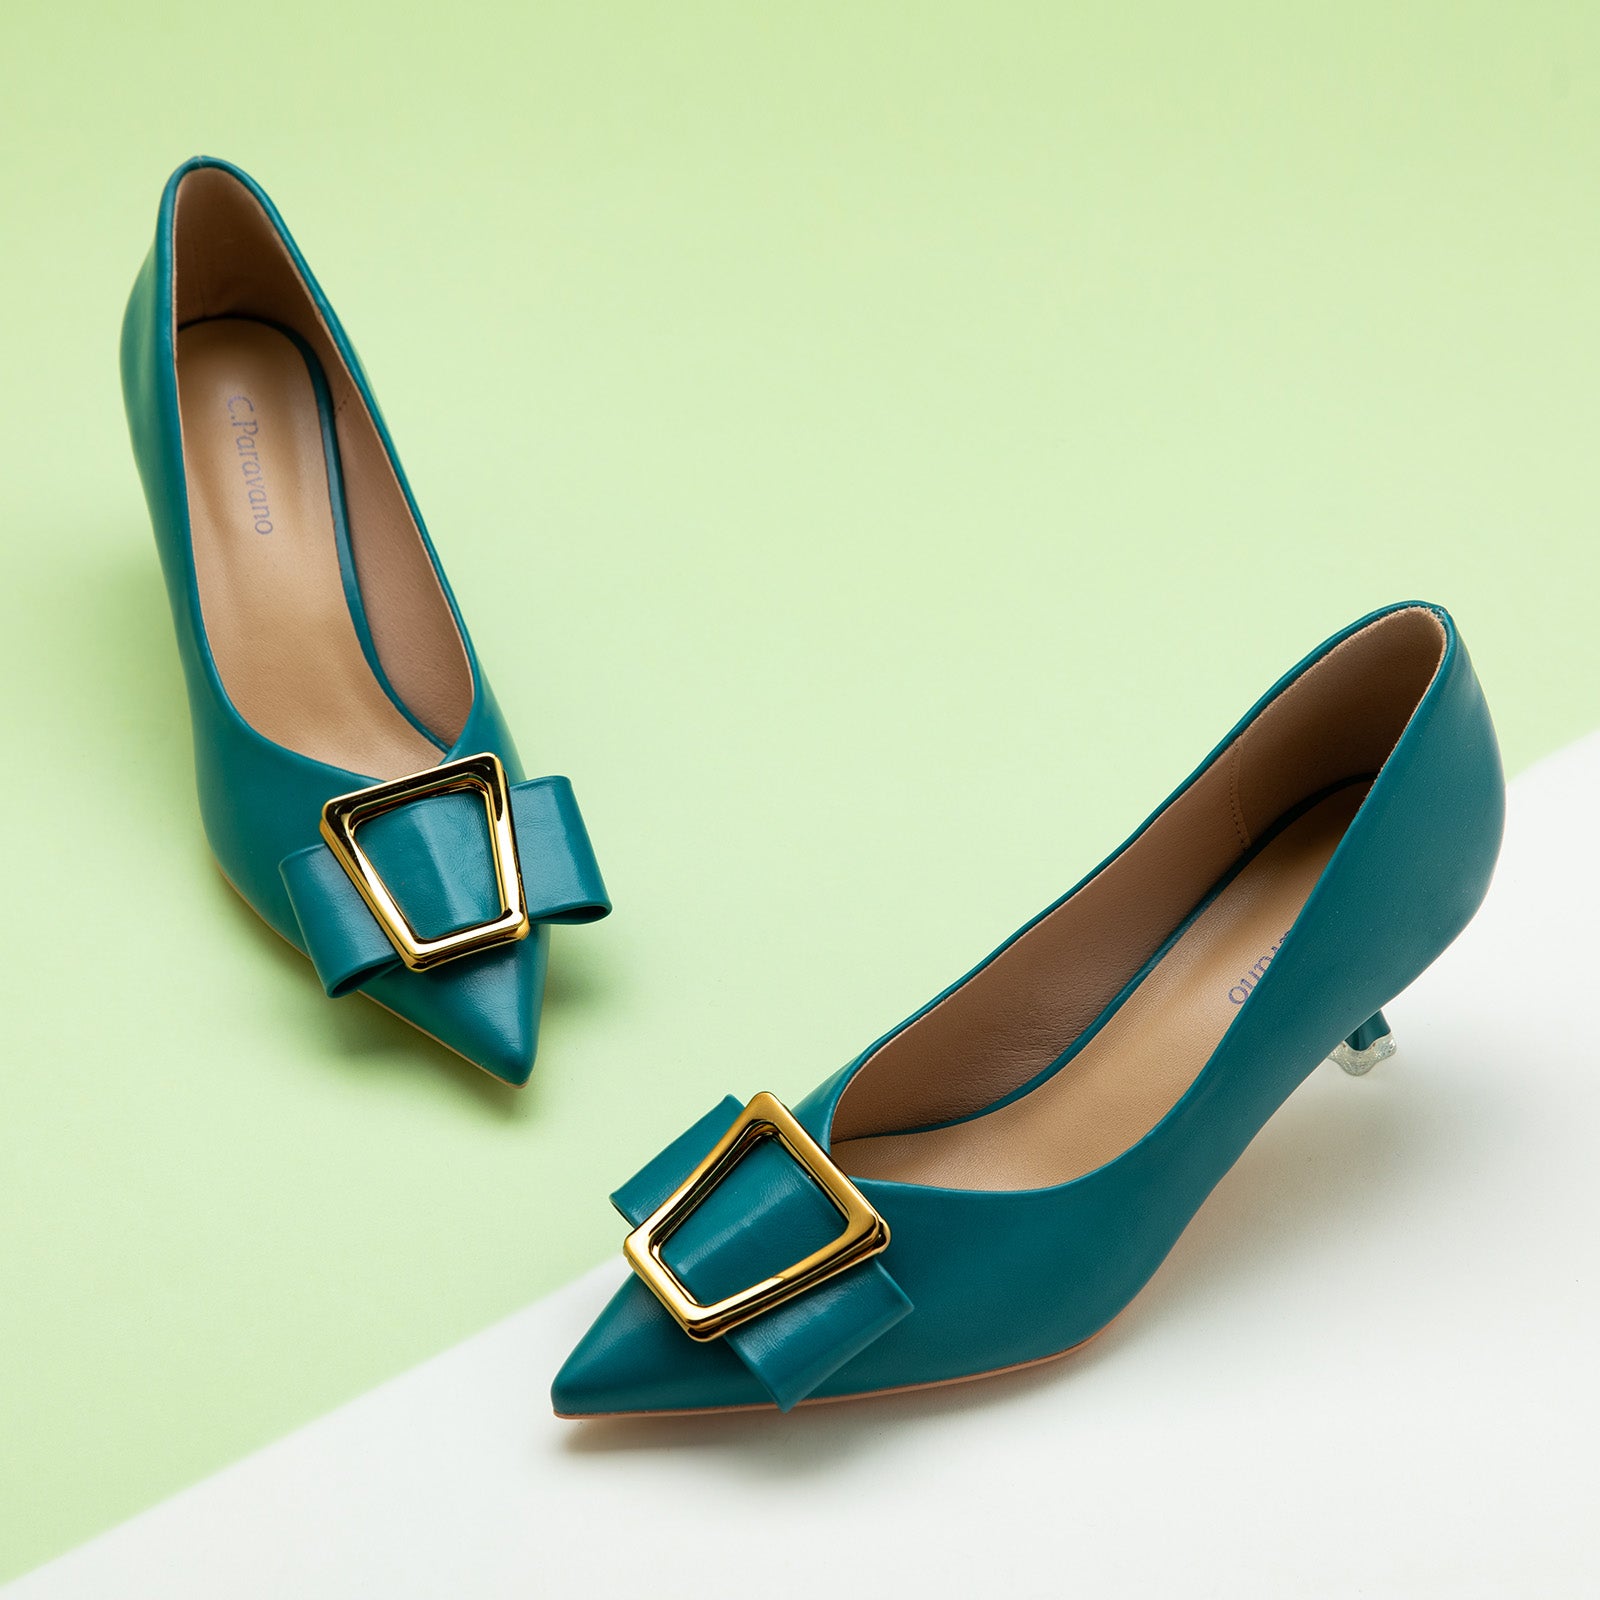 Peacock Blue Geometric Kitten Heel Women Pumps, a vibrant and exotic choice for a bold and stylish look